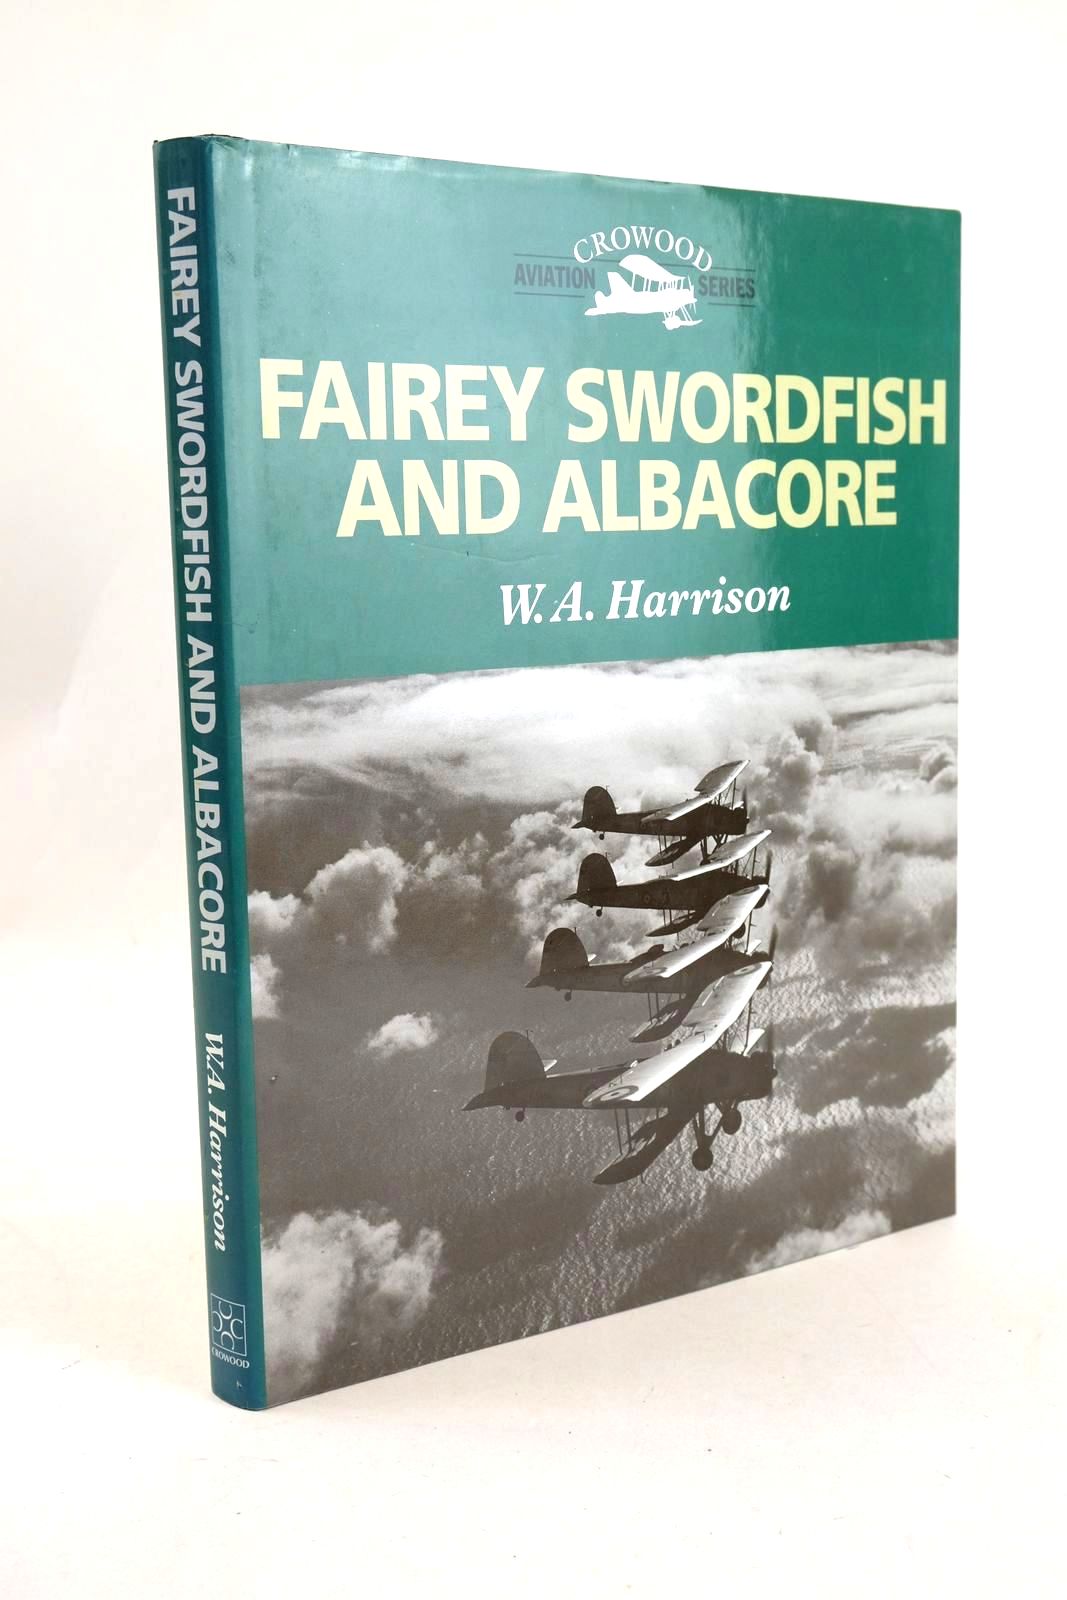 Photo of FAIREY SWORDFISH AND ALBACORE (CROWOOD AVIATION) written by Harrison, W.A. published by The Crowood Press (STOCK CODE: 1327957)  for sale by Stella & Rose's Books